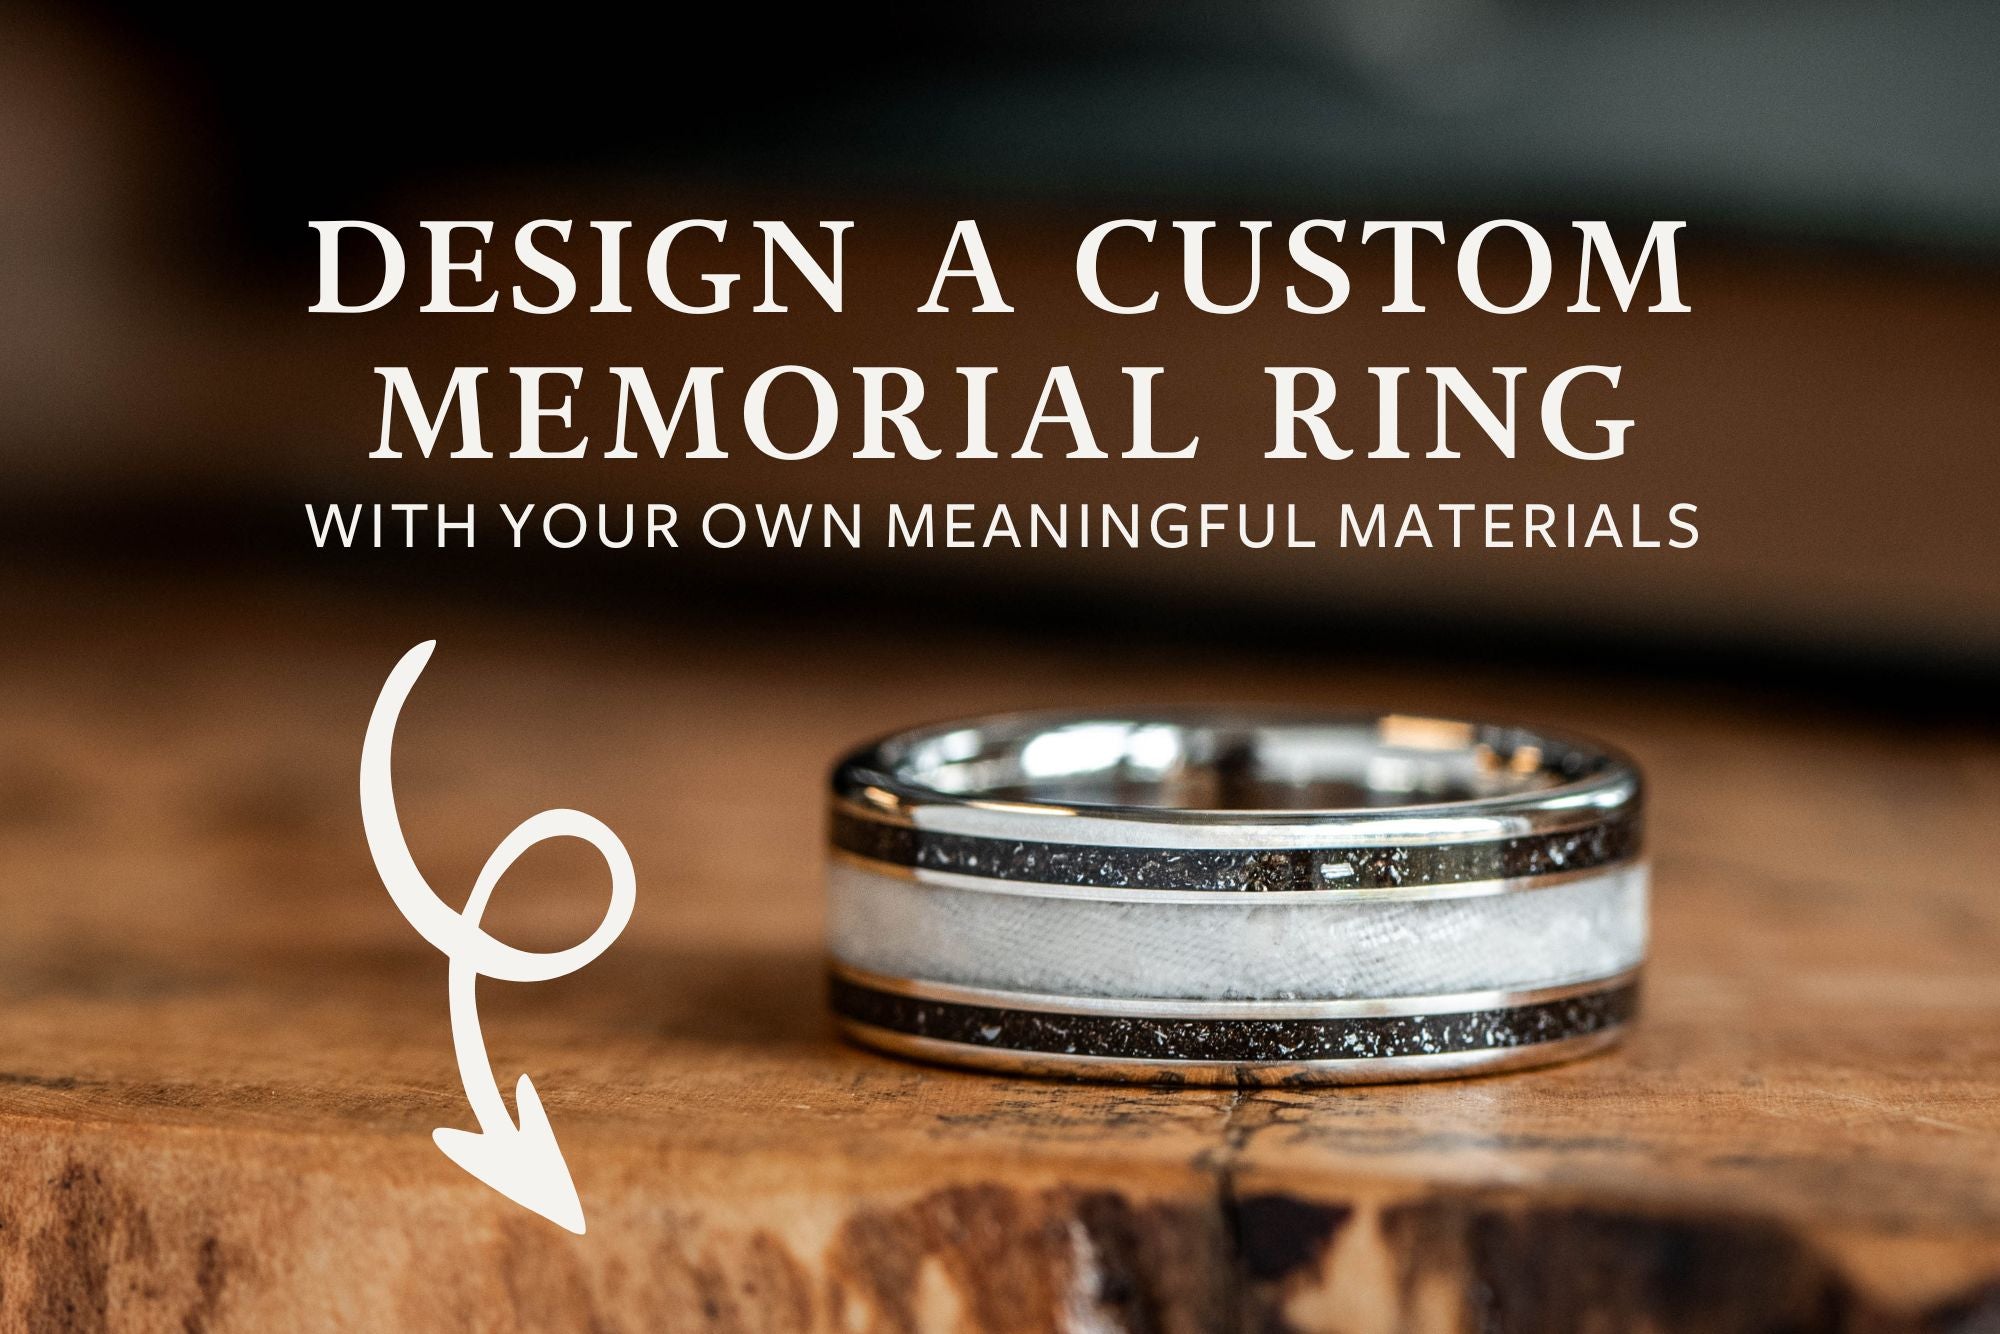 12-ways-to-memorialize-a-loved-one-design-a-custom-memorial-ring-with-your-own-meaningful-materials-rustic-and-main